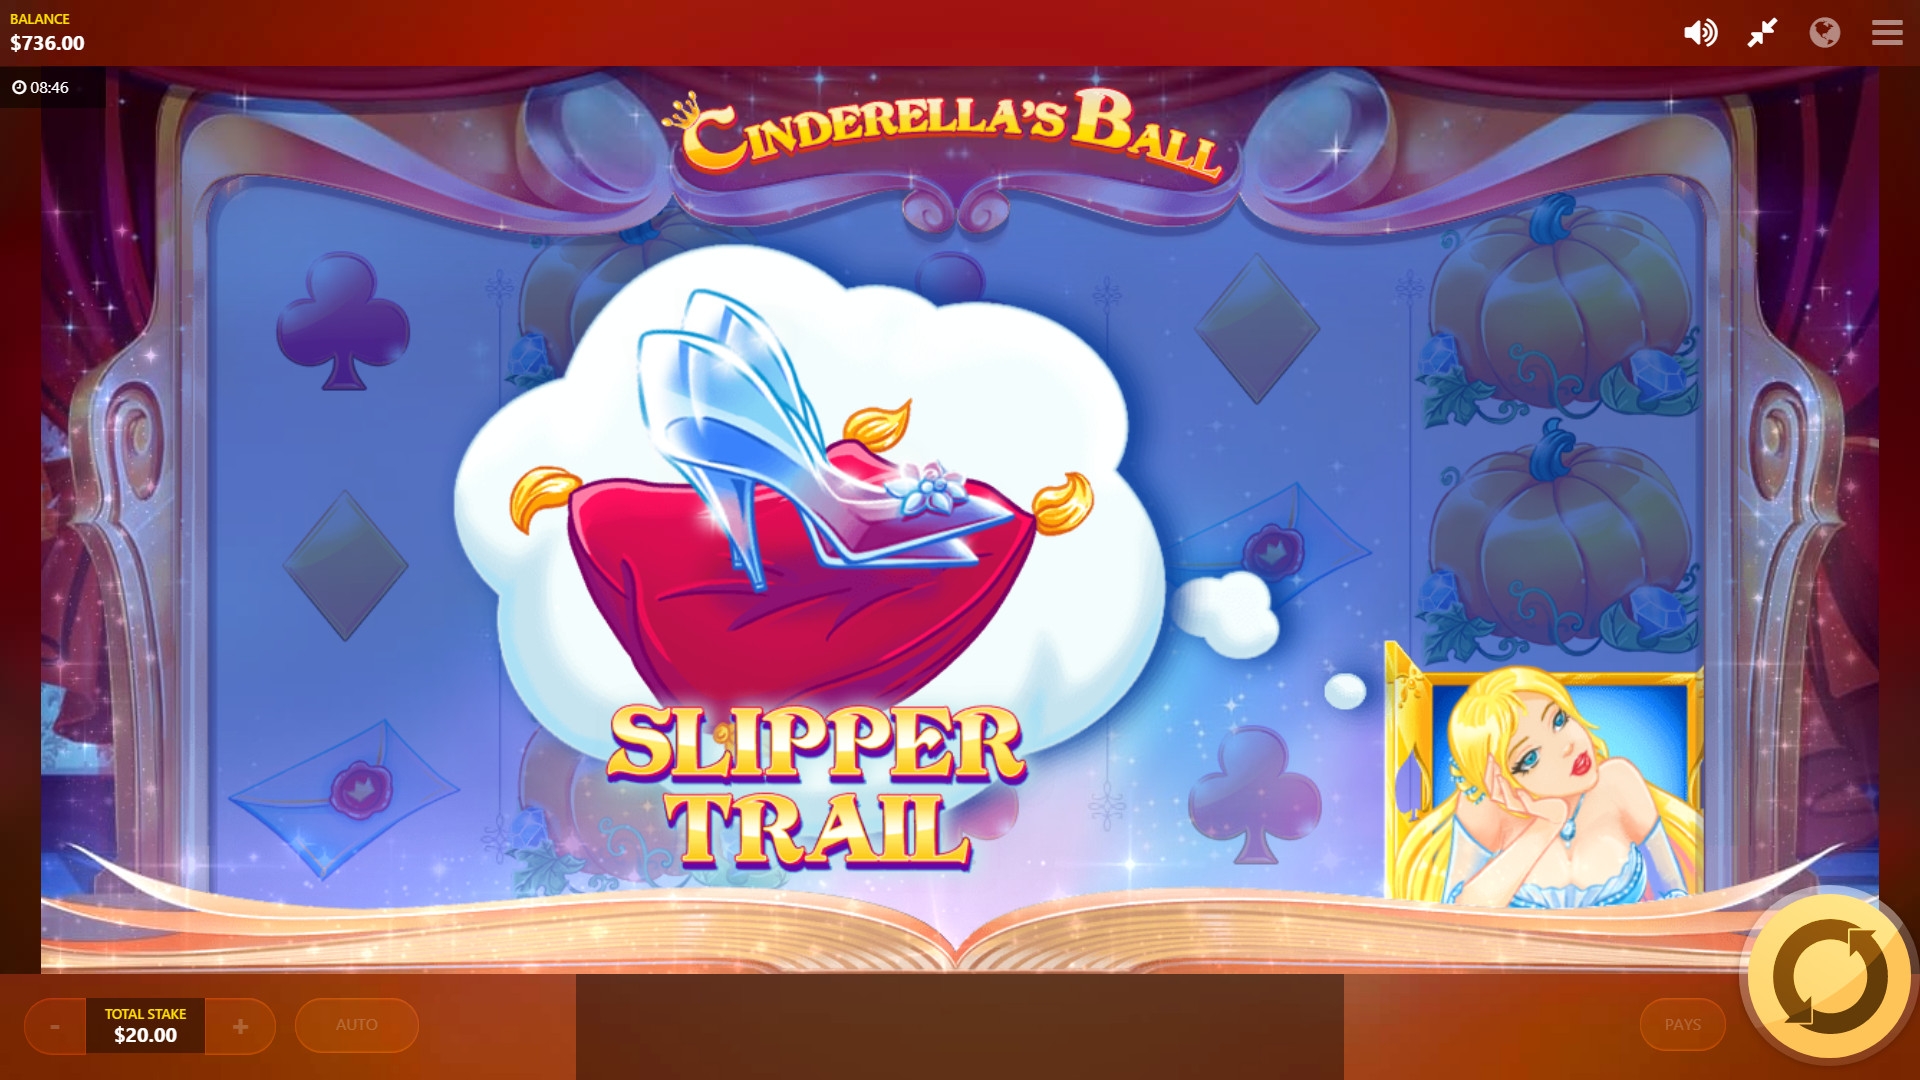 Cinderella’s Ball (Cinderella’s Ball) from category Slots